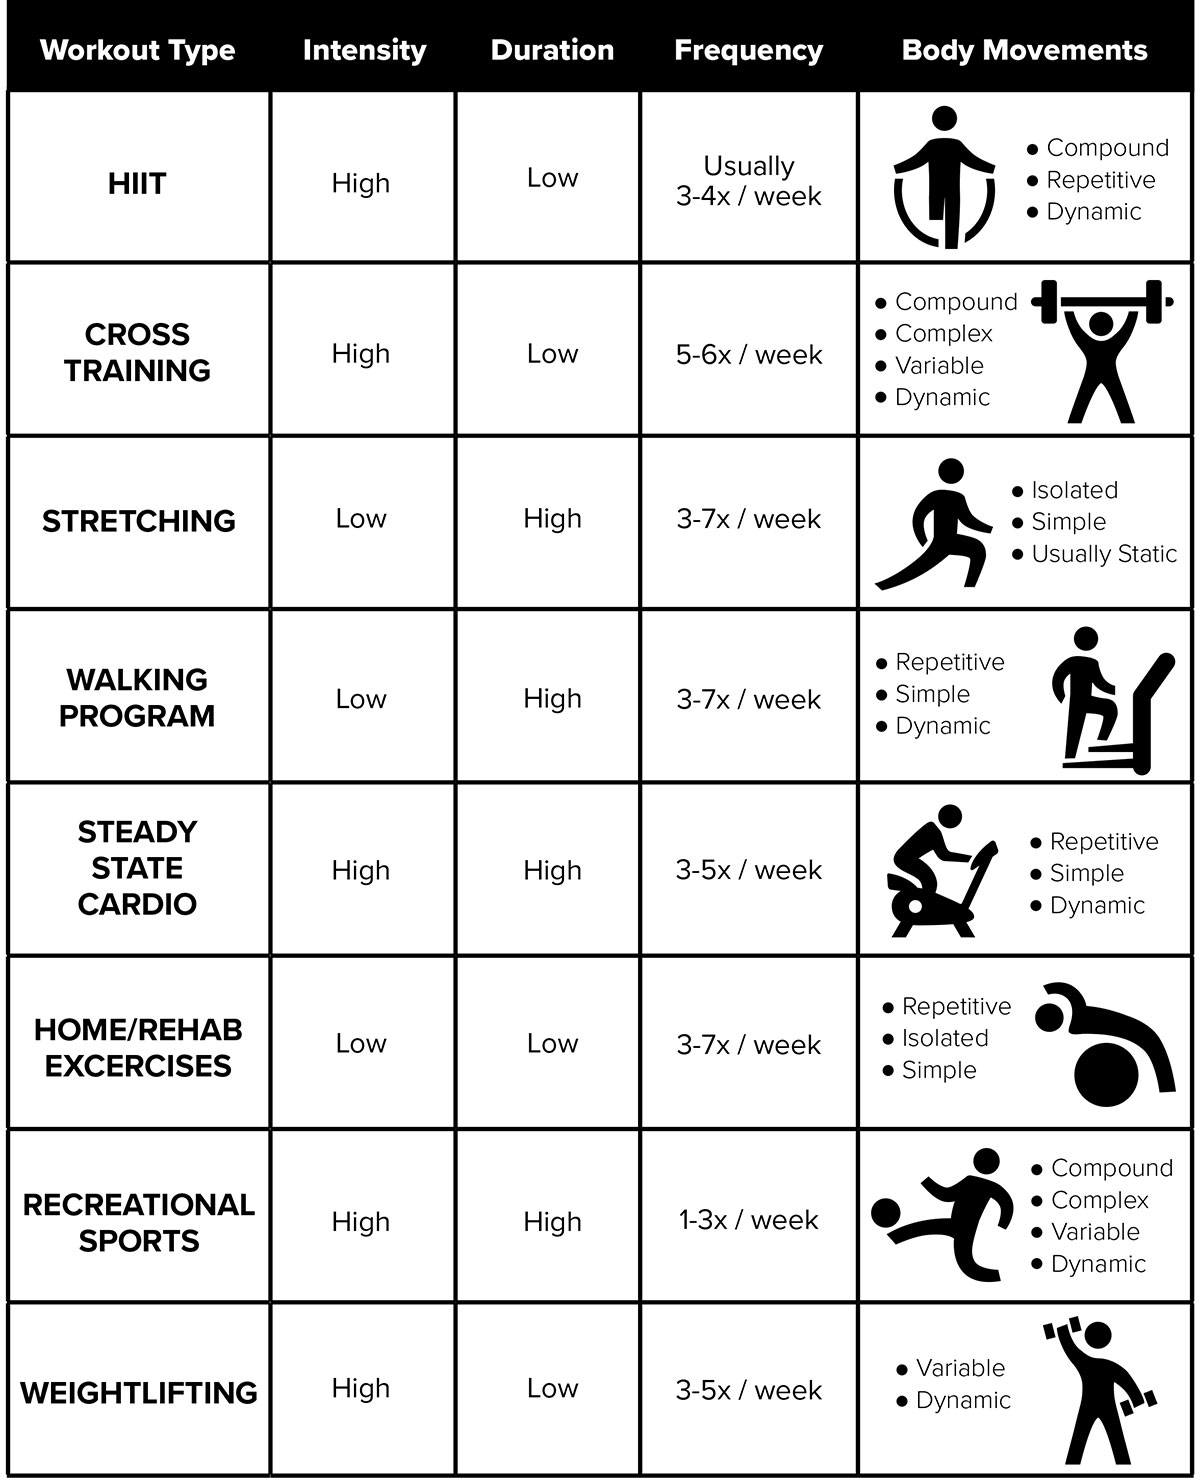 Choosing the best workout for you BenchMark Physical Therapy